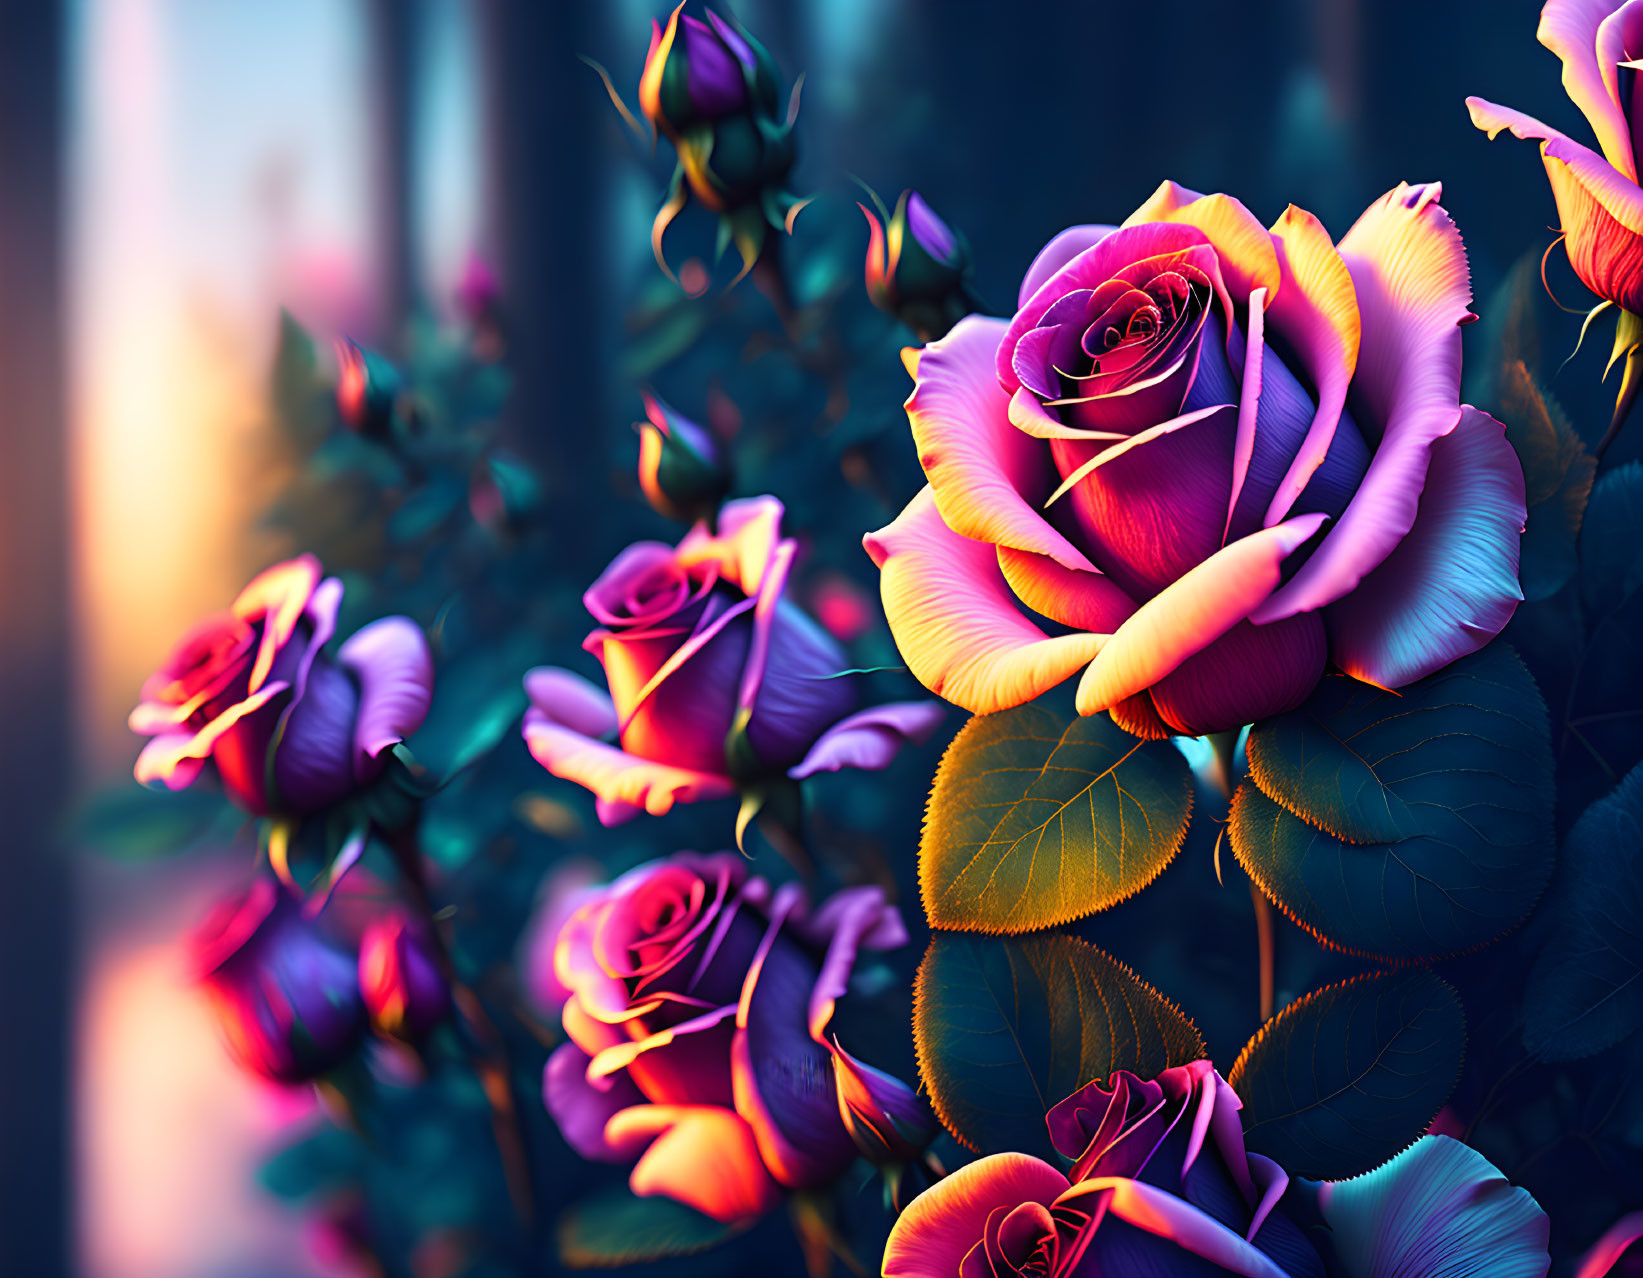 Purple and Pink Roses with Detailed Petals on Blurred Green Background